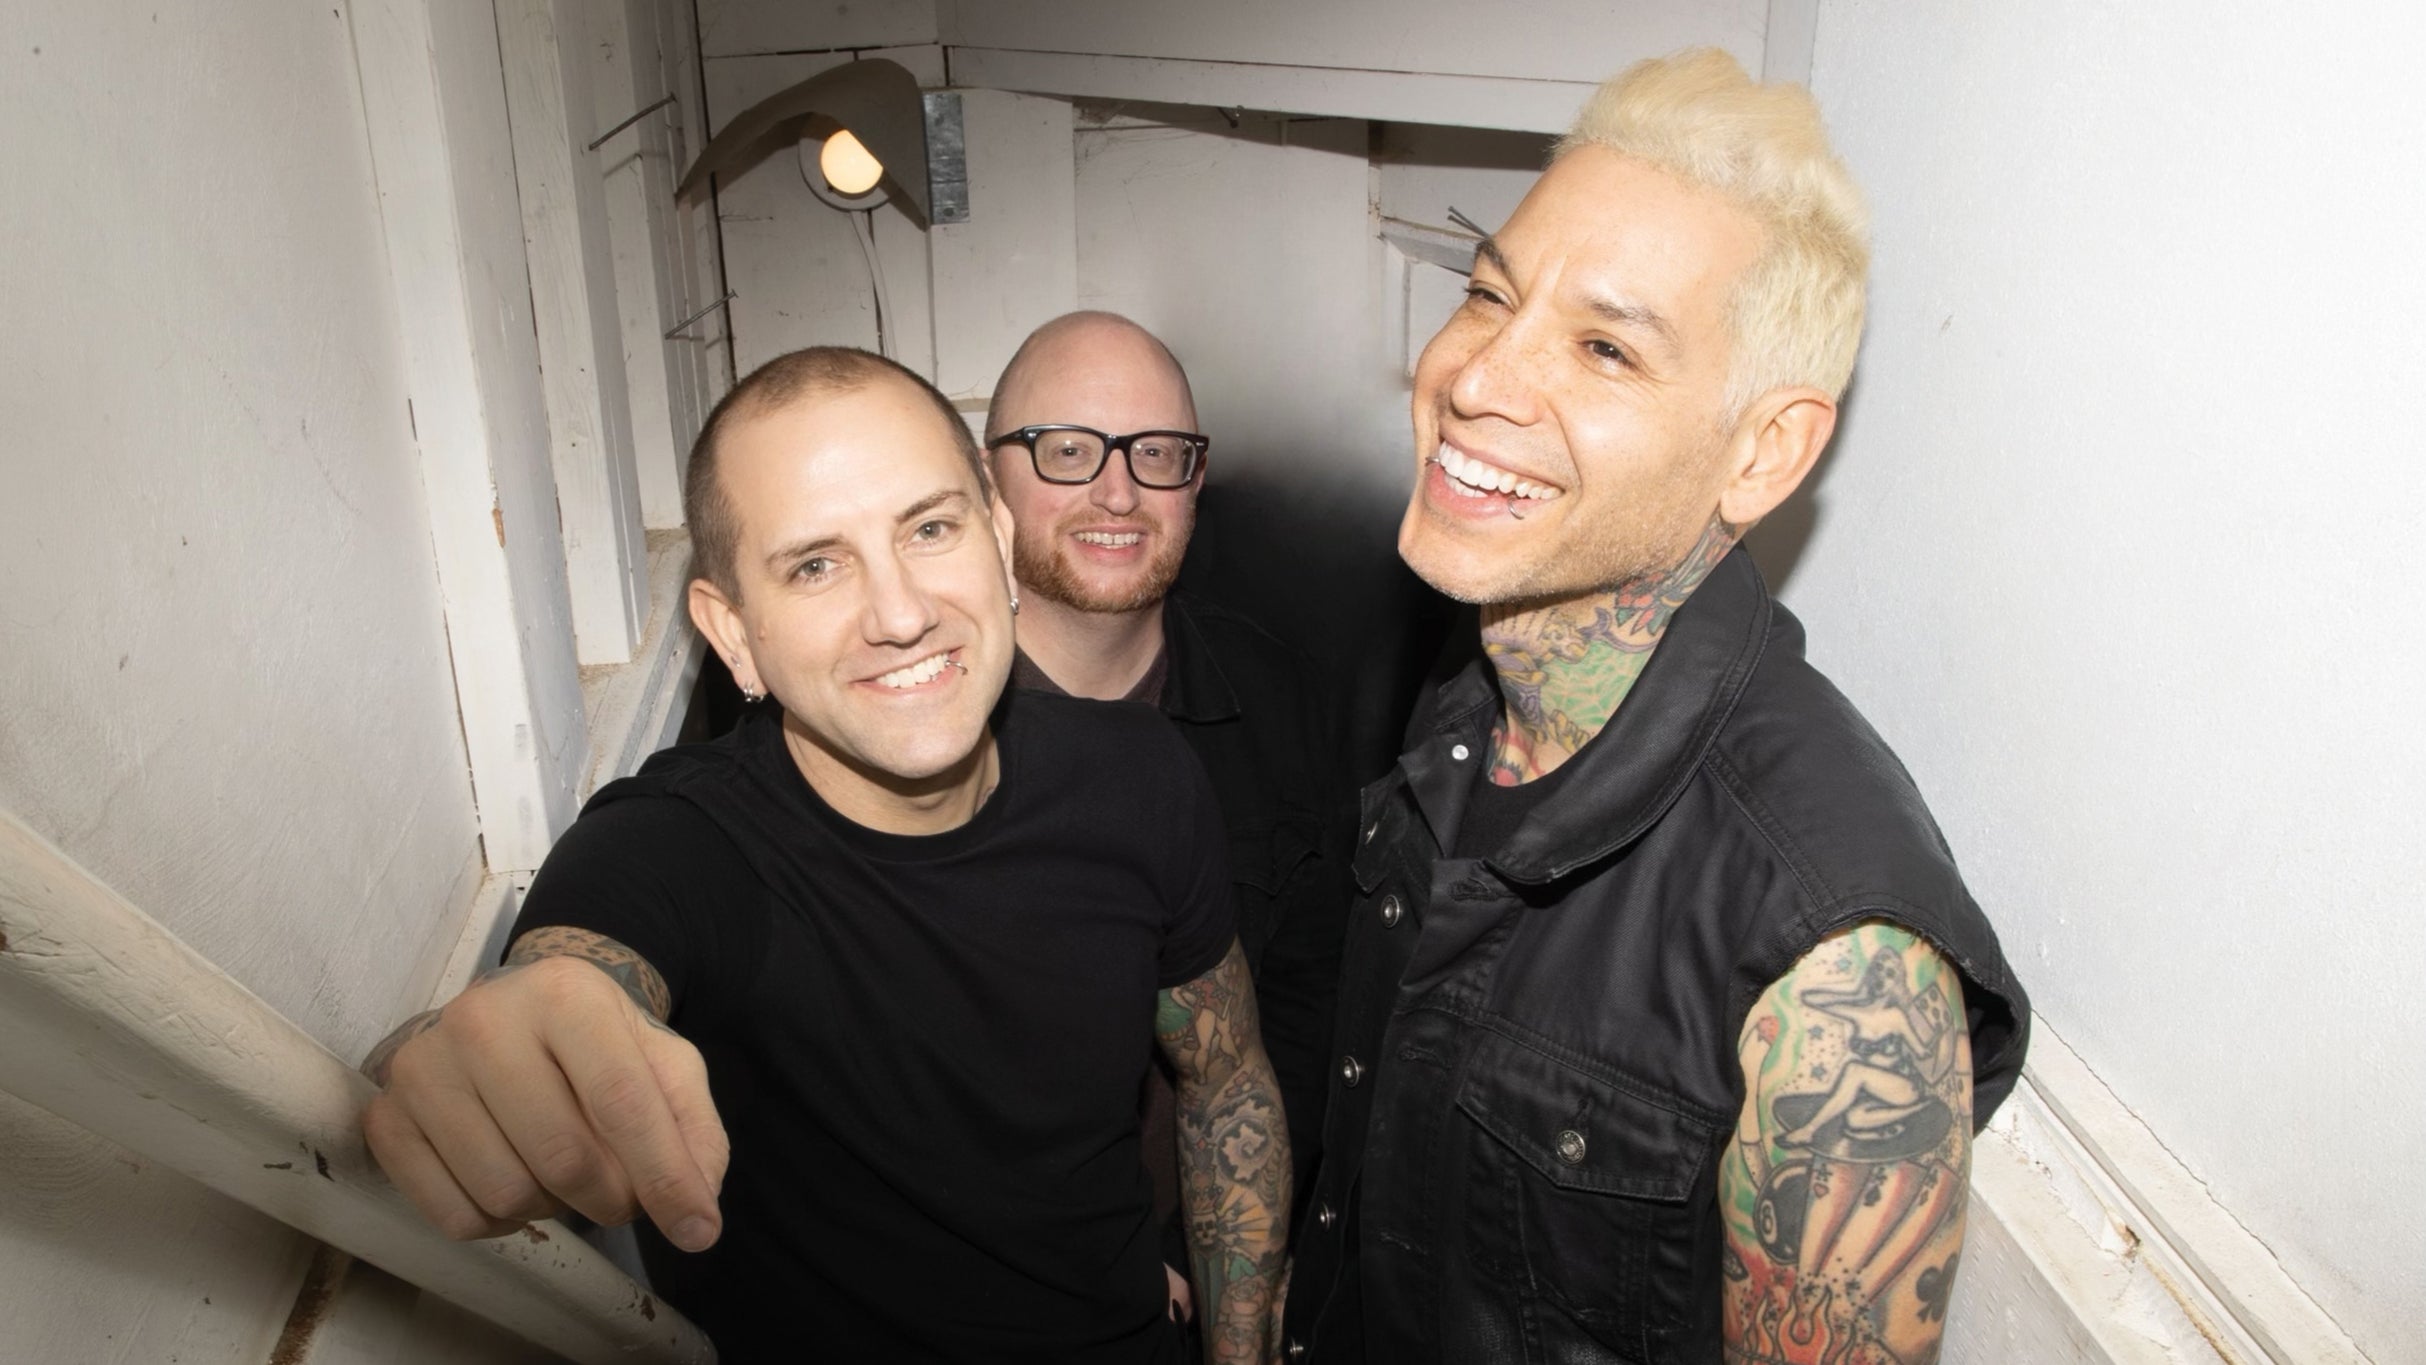 members only presale code for MxPx advanced tickets in Orlando